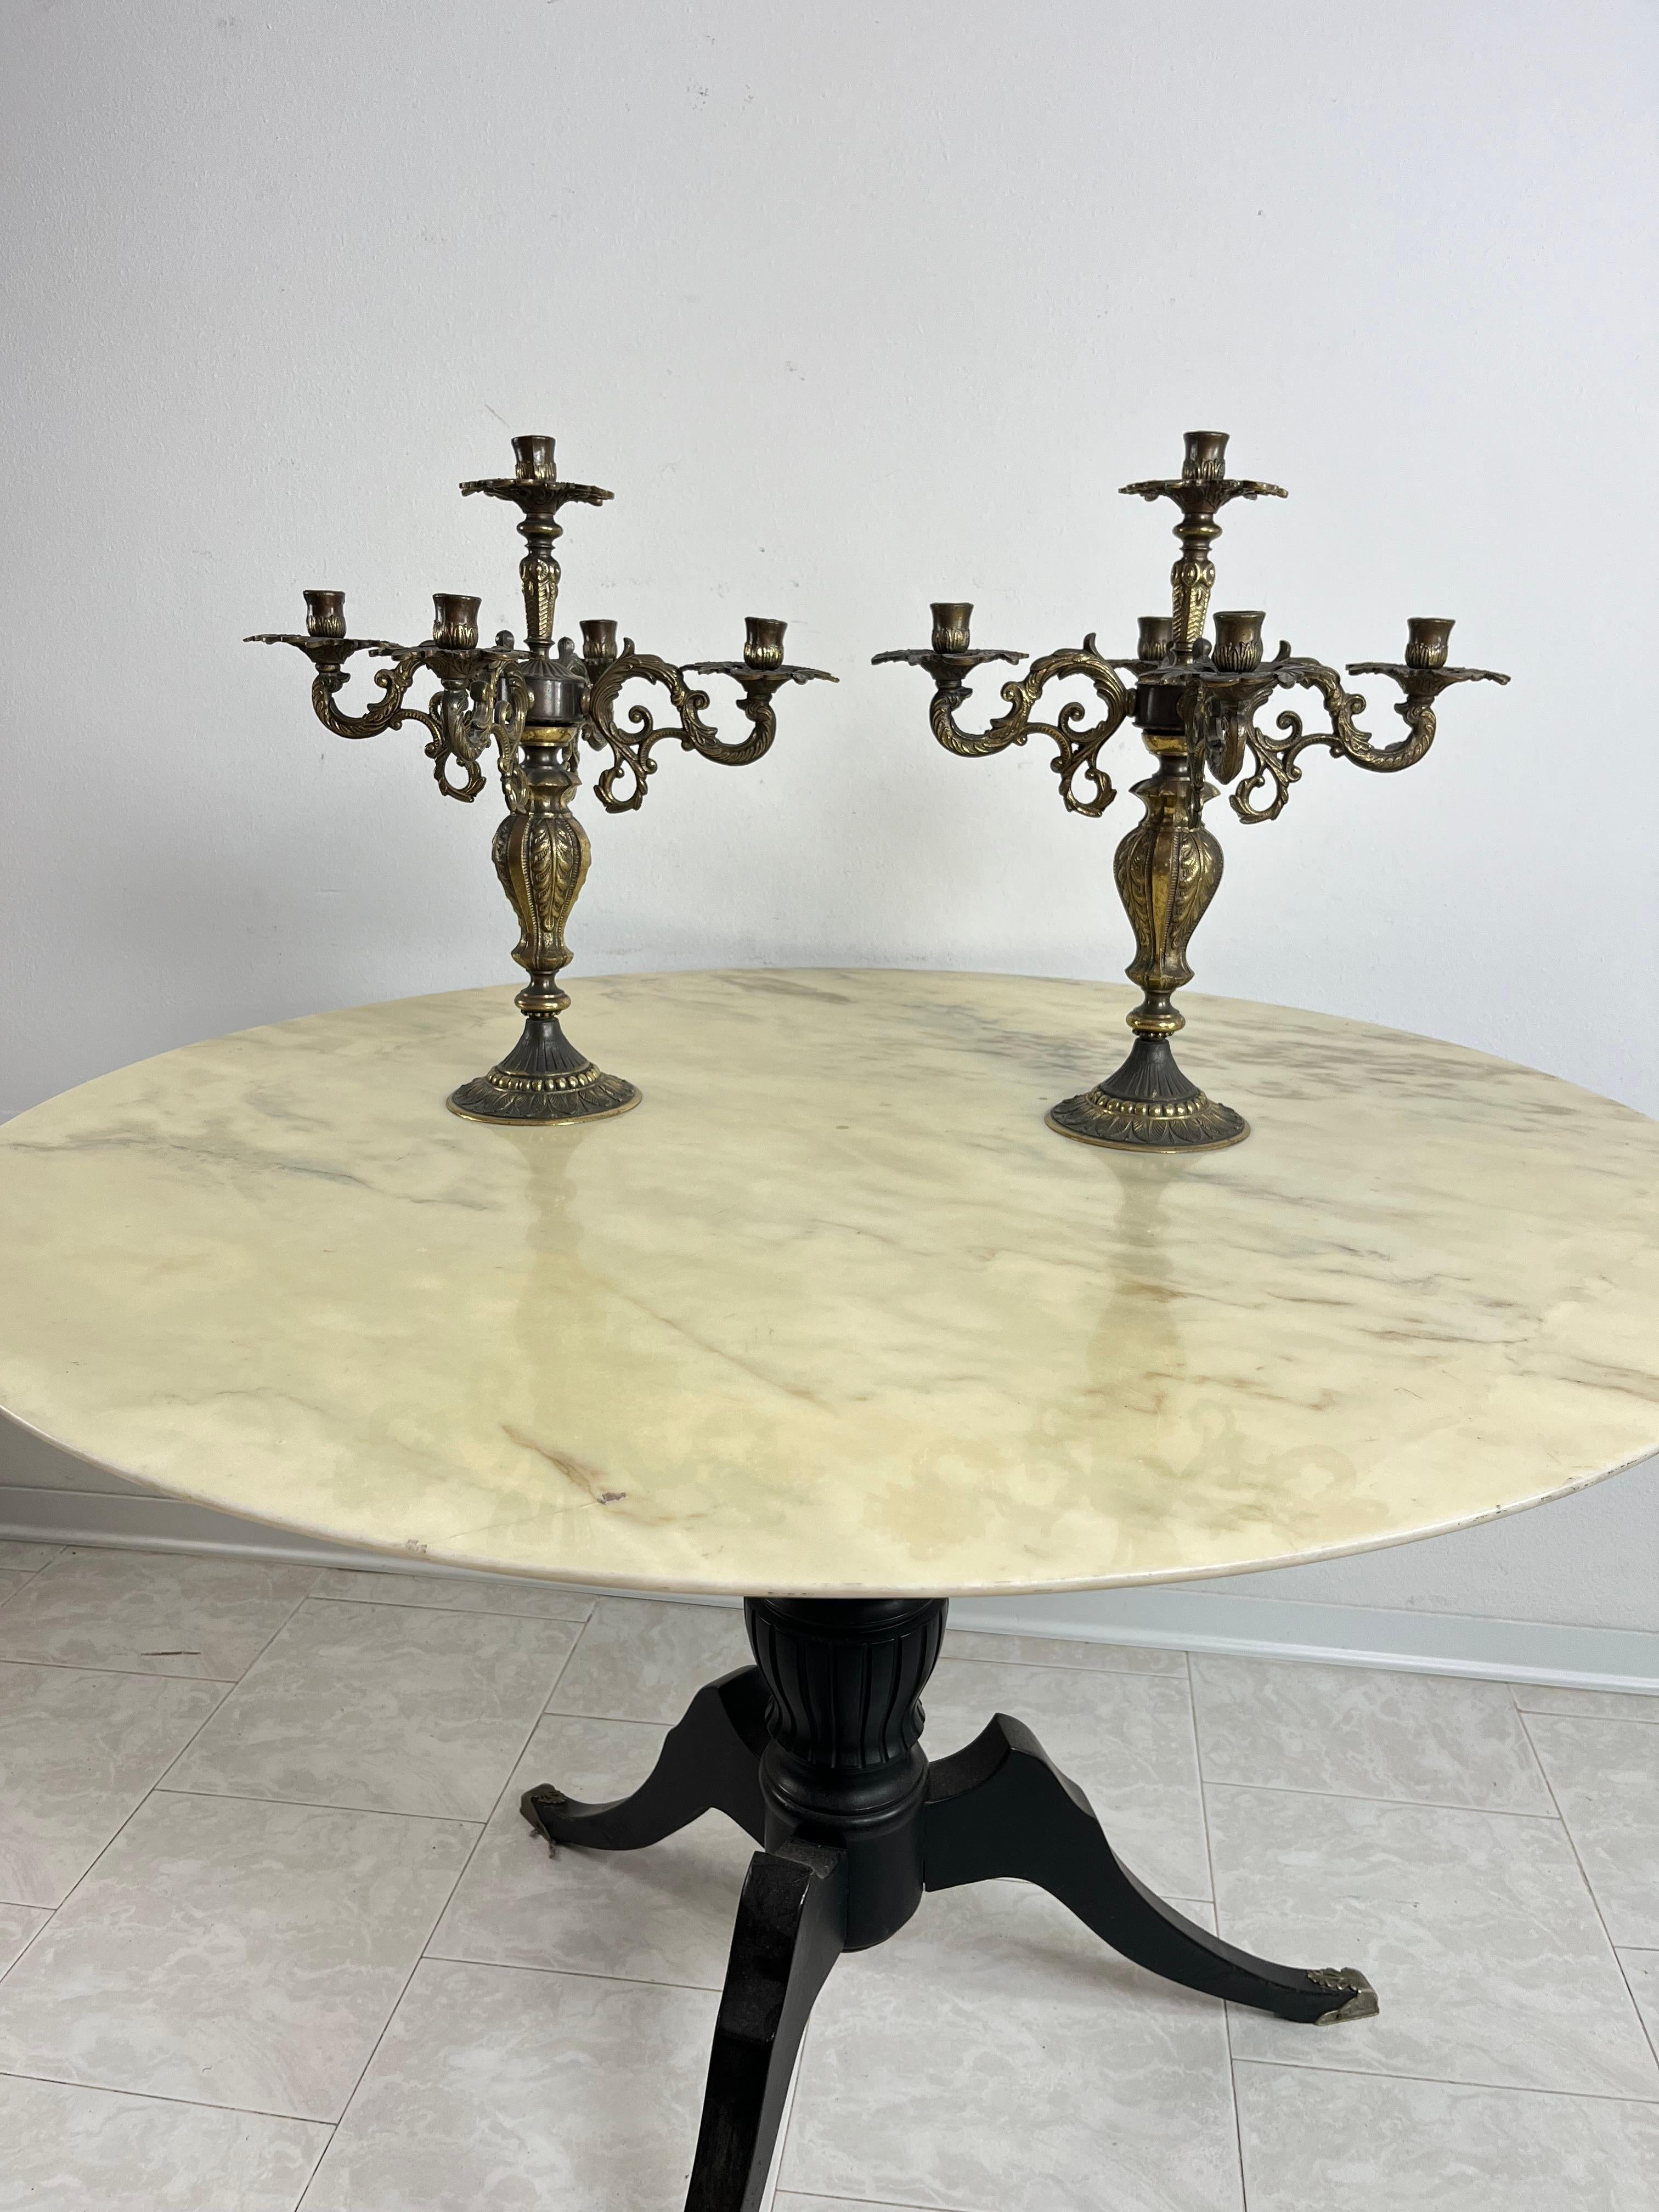 
Set of 2 Large Mid-Century Bronze 5 Flame Candlesticks 1960s
Intact and in good condition, small signs of aging.